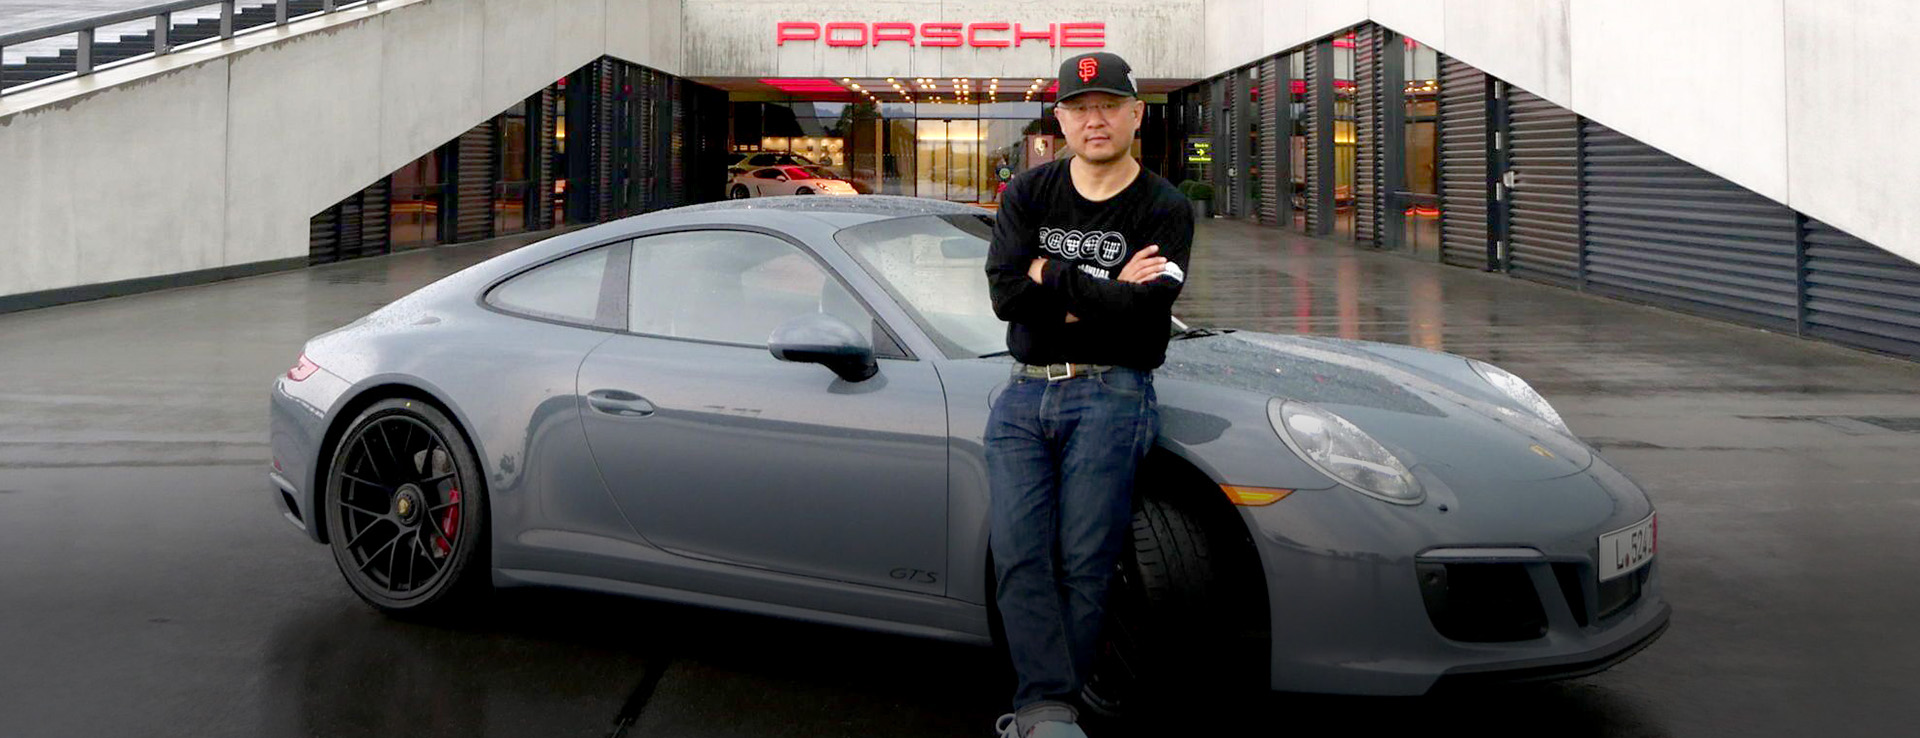 Man outside Porsche Delivery Centre with grey 911 Carrera GTS